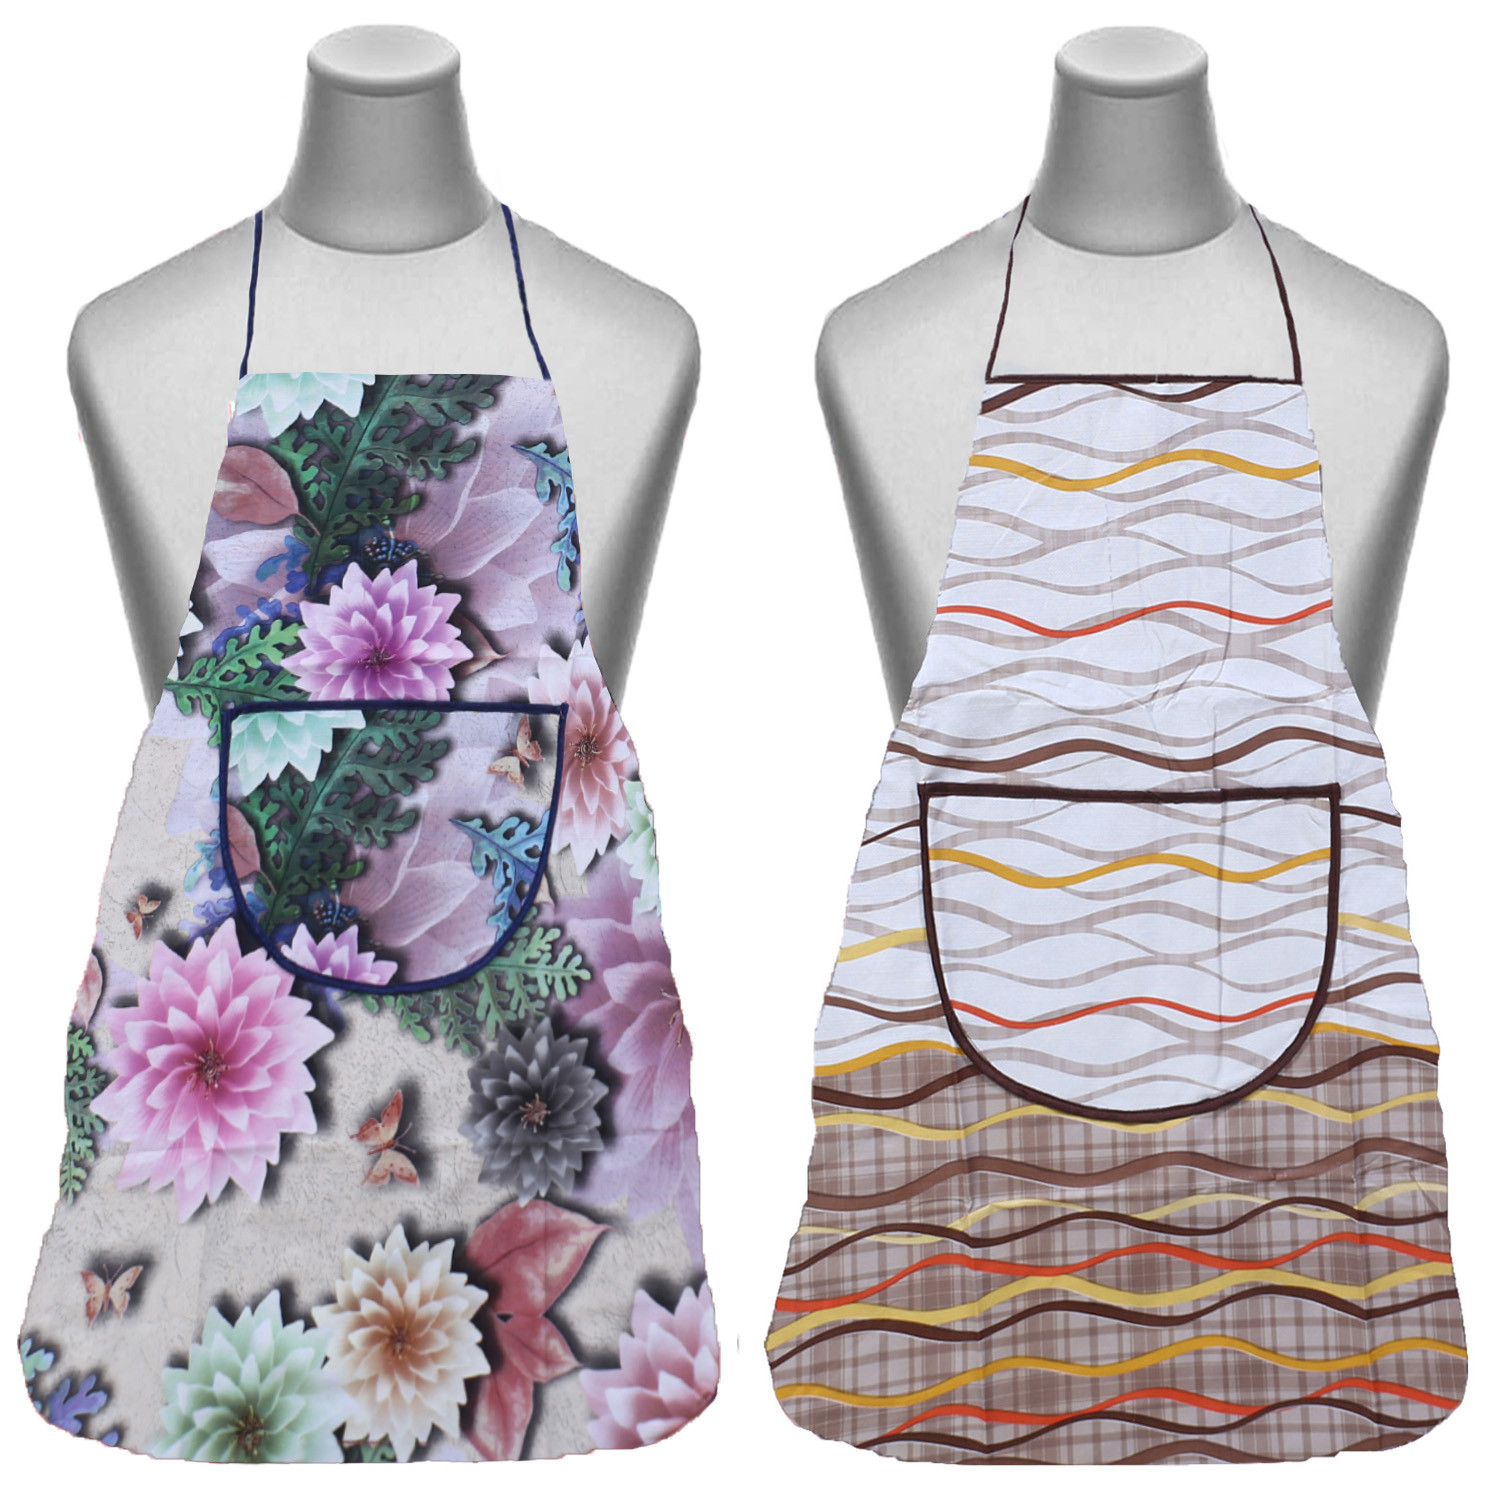 Kuber Industries Apron|PVC Unique Floral & Strips Print Kitchen Chef Cloth|Waterproof Centre Pocket Apron With Tying Cord for Men & Women,Pack of 2 (Multicolor)